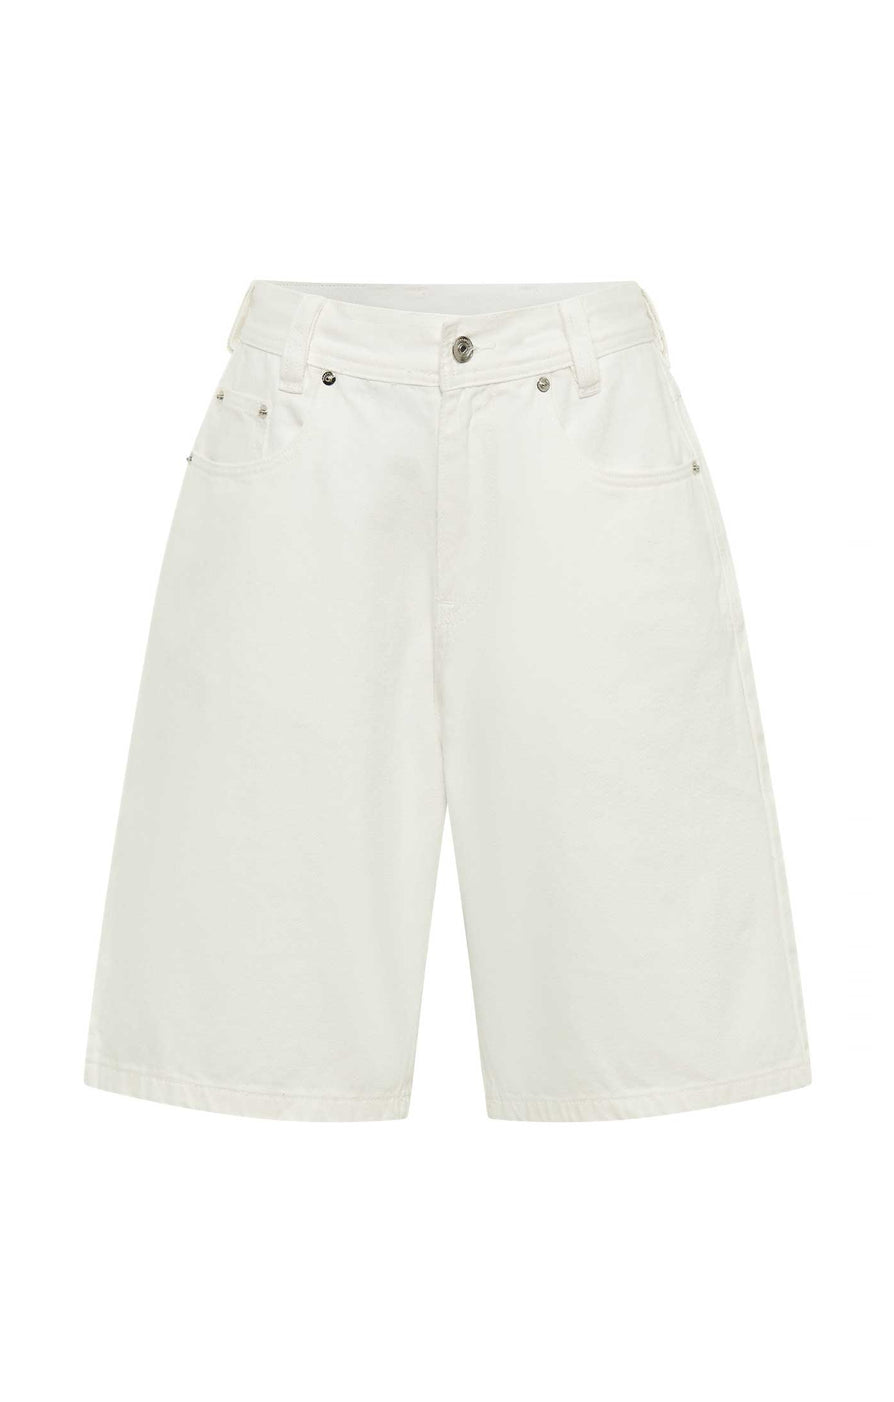 THE MAXWELL SHORT WHITE | ghost